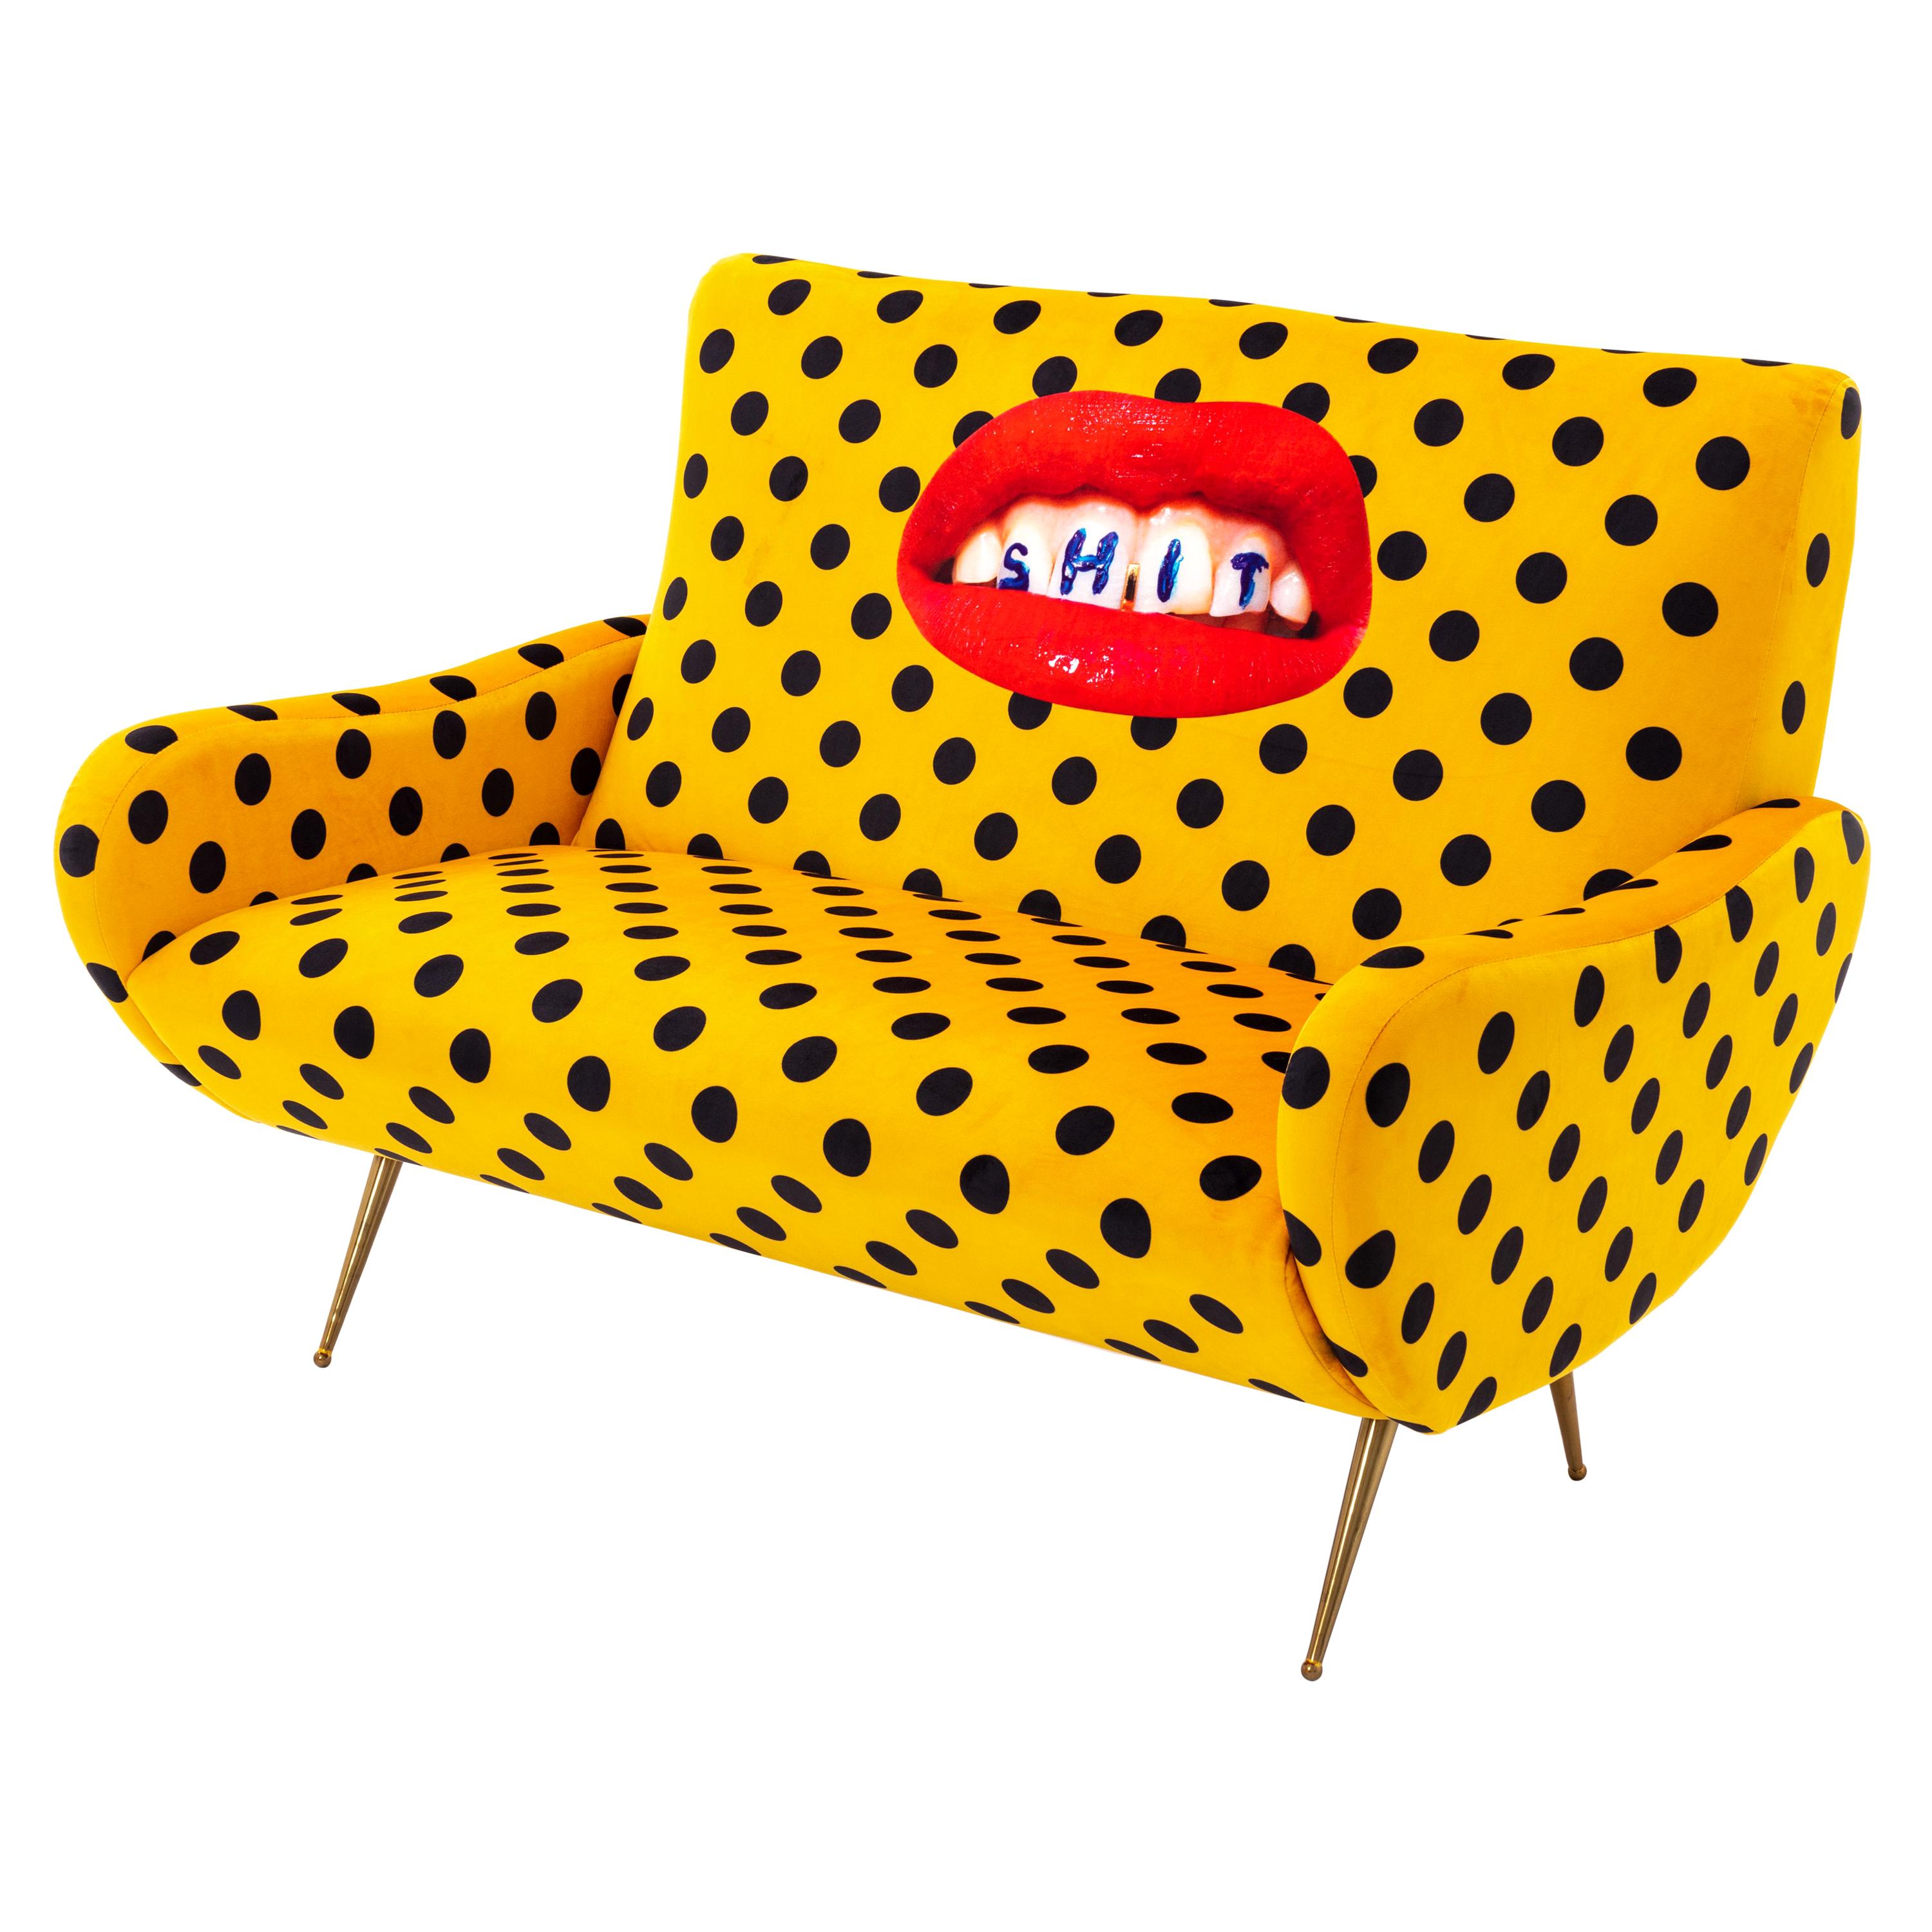 Seletti "Shit" Upholstered Two-Seat Sofa by Toiletpaper